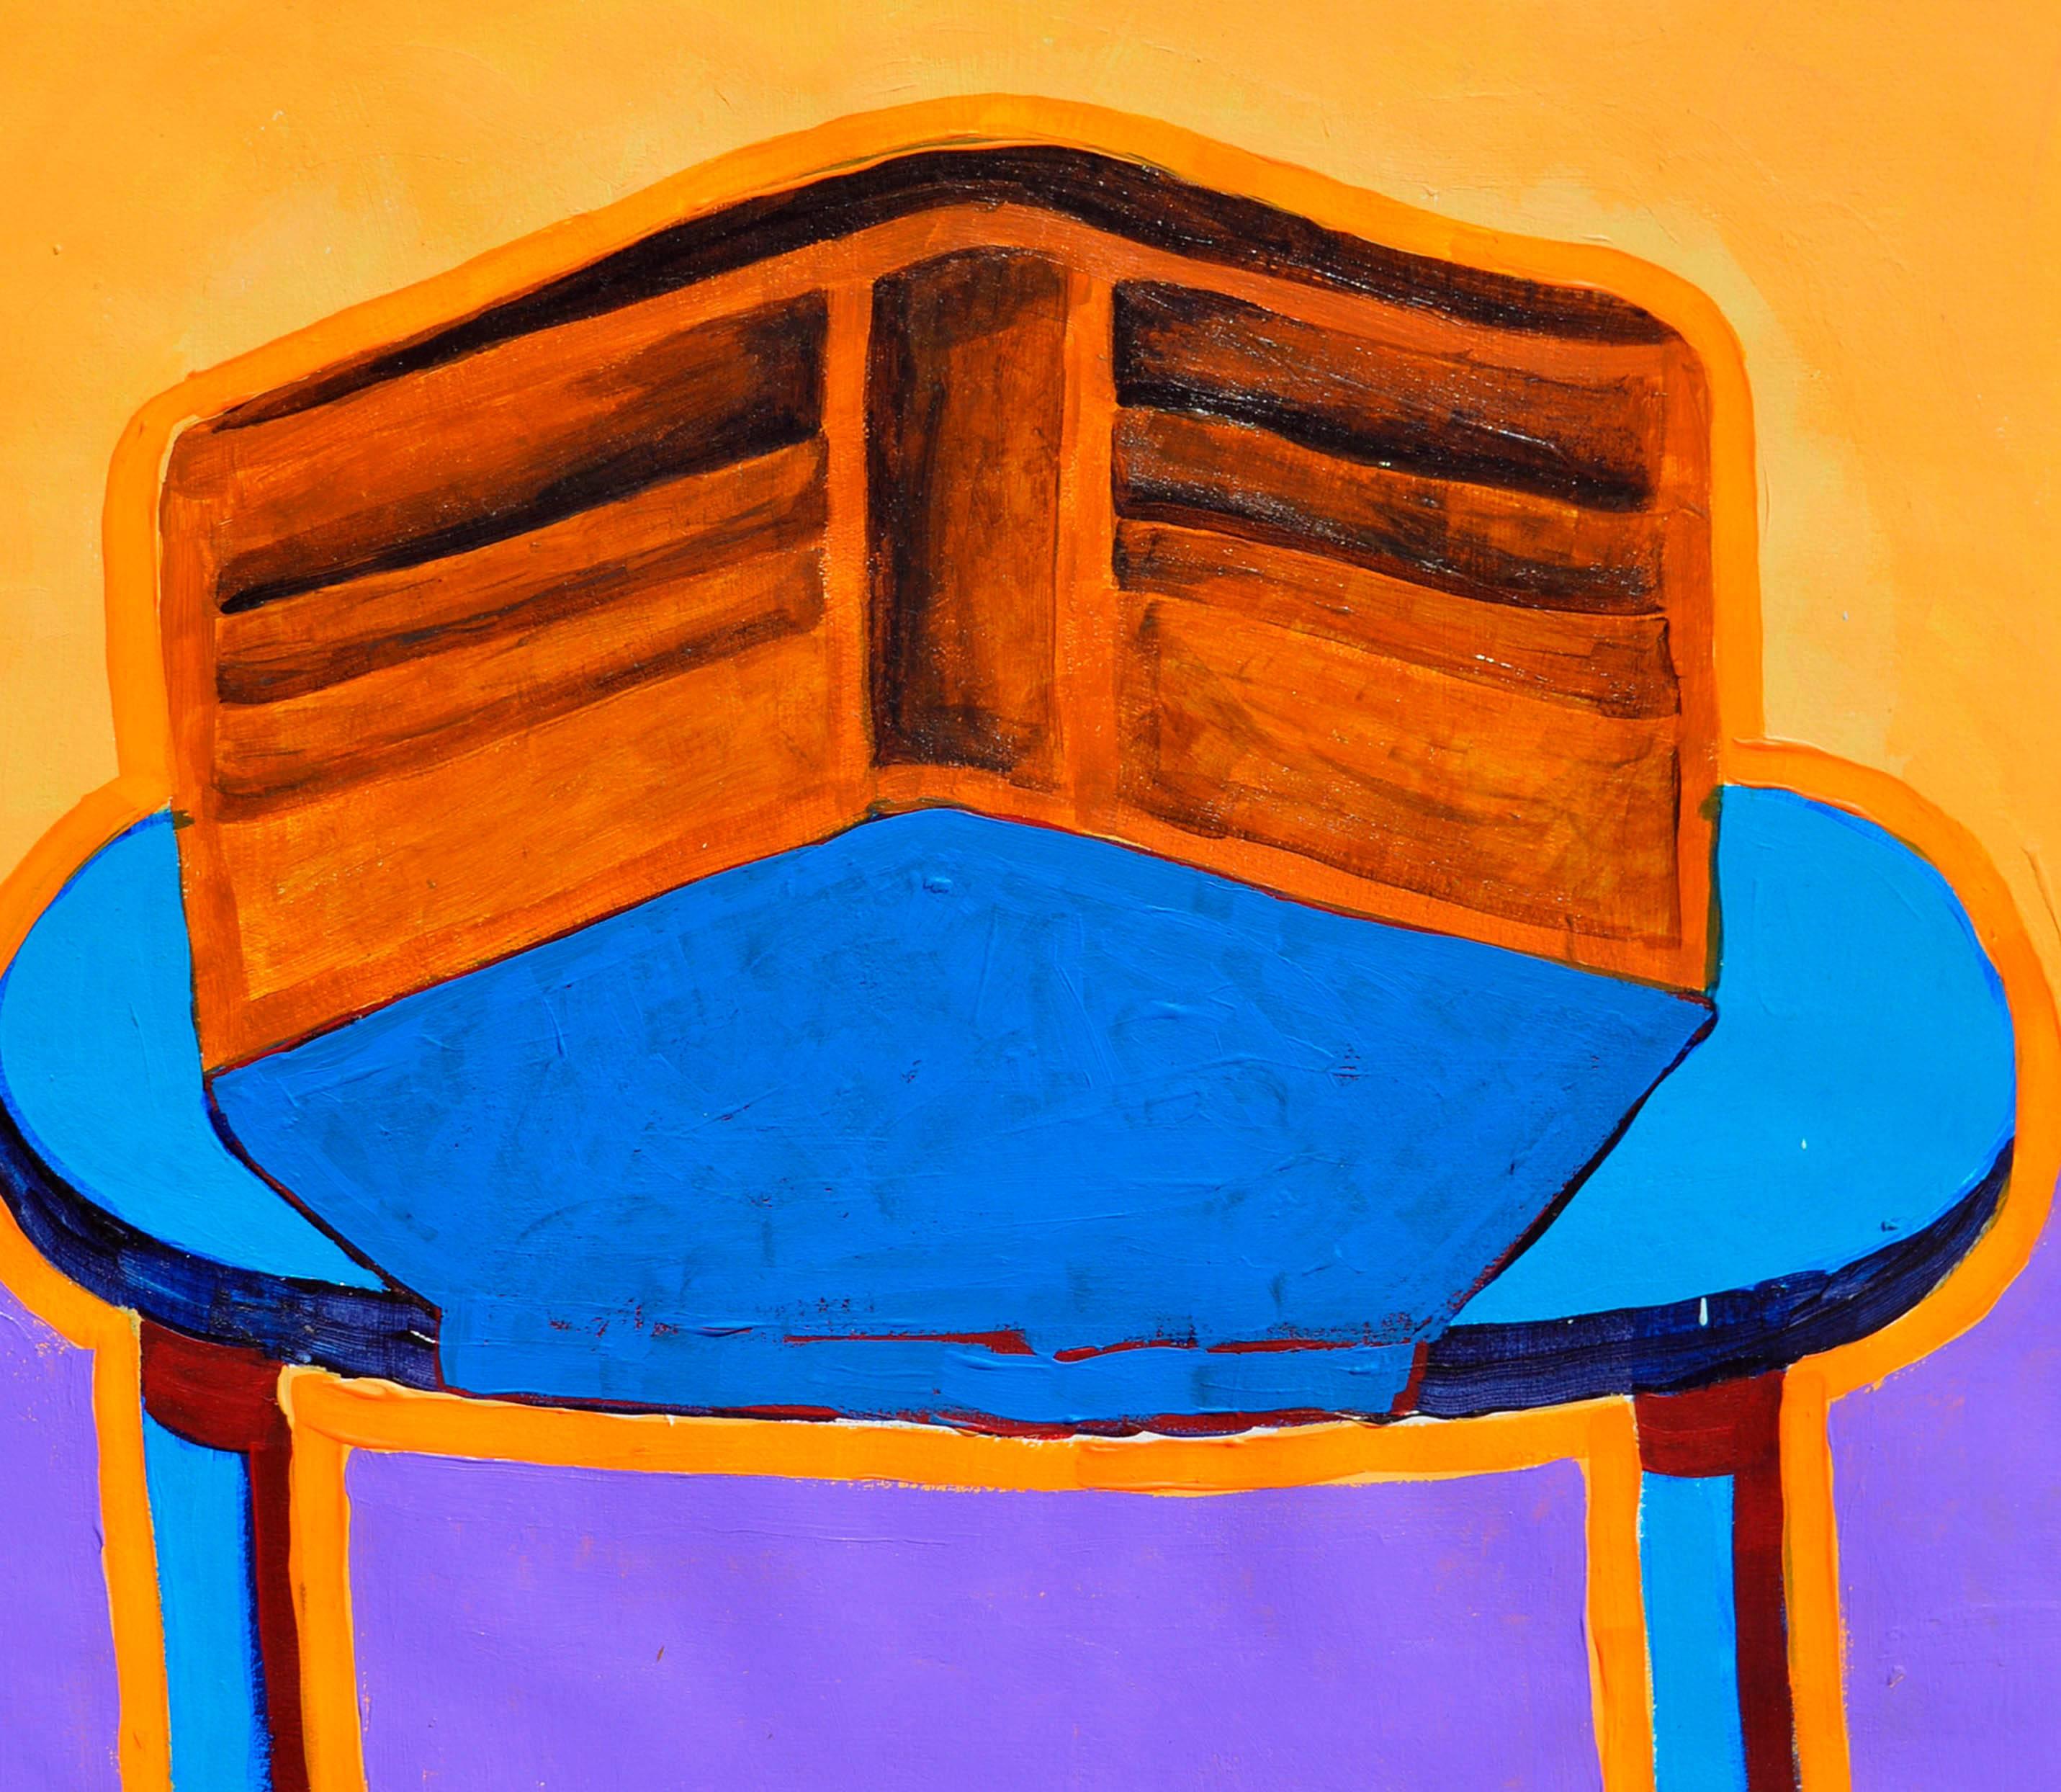 Her Clutch on Blue Table - Abstract Expressionist Painting by Michael Eggleston